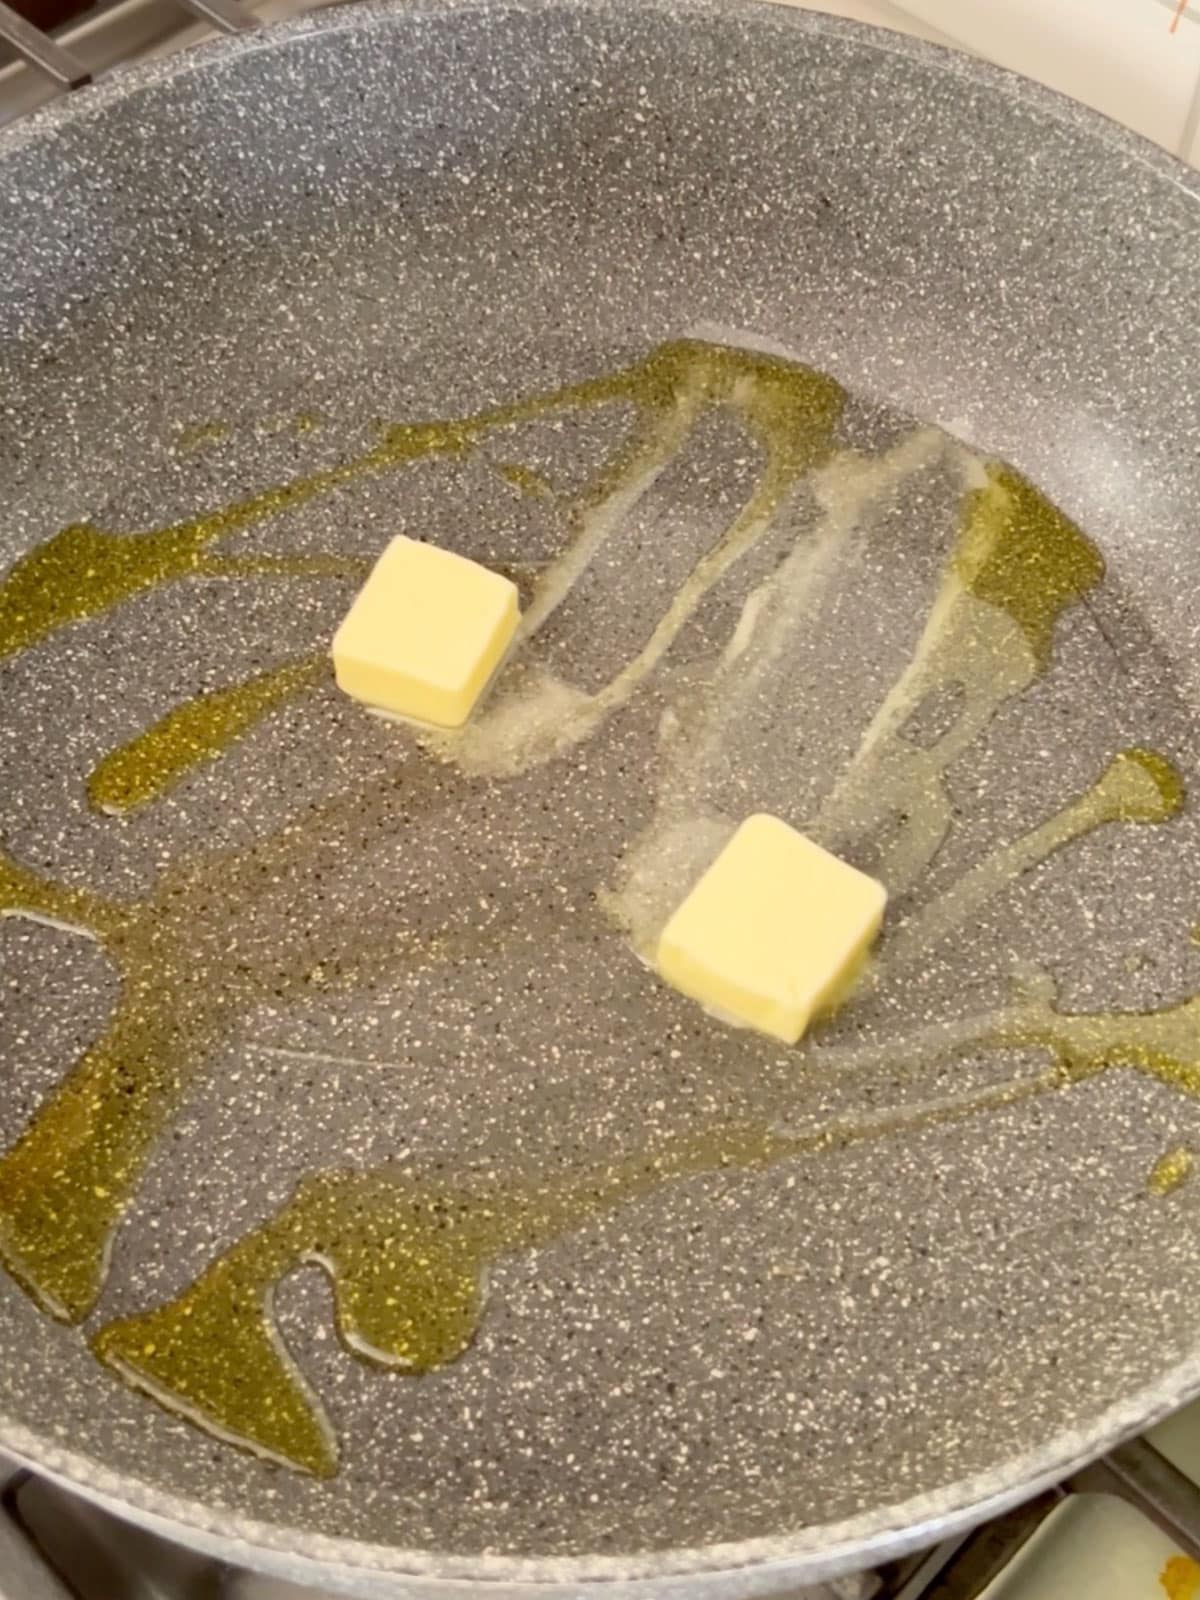 Butter and oil melting in a hot skillet.